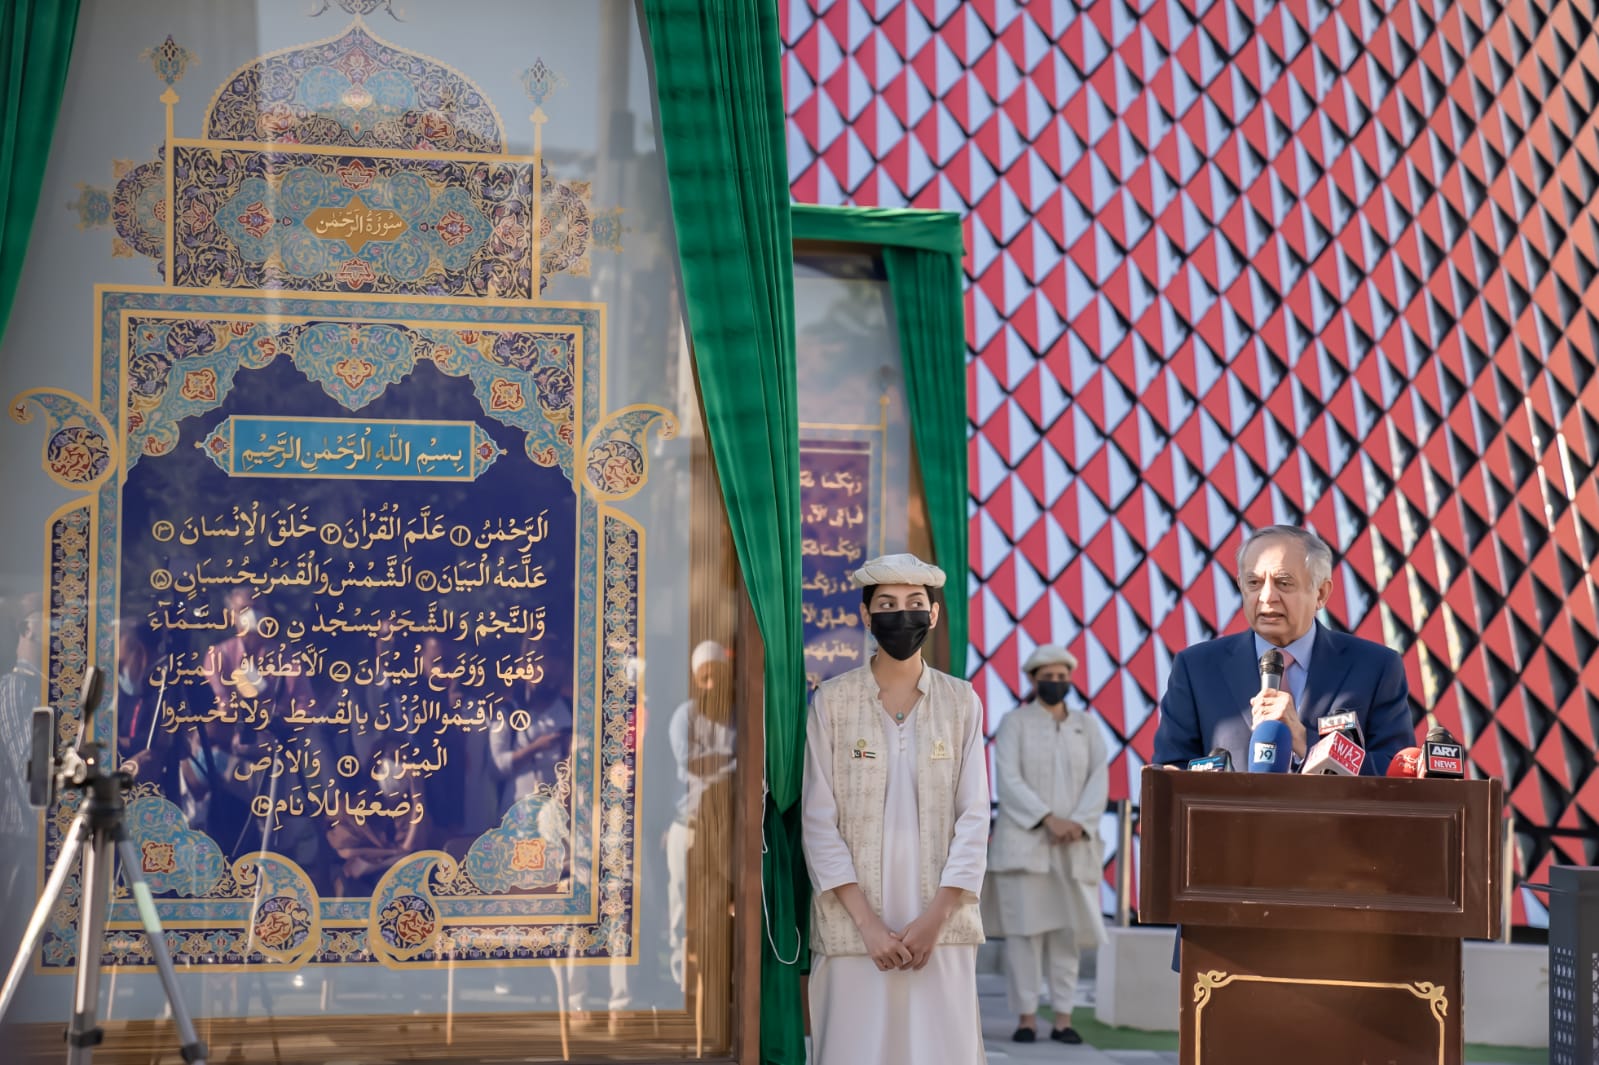 Adviser to the Prime Minister on Commerce and Investment Abdul Razak Dawood speaking during the unveiling ceremony of the worlds largest Quran at the Pakistan Pavillion of the Dubai Expo 2020 in January 2022. — Twitter/ Shahid Rassam